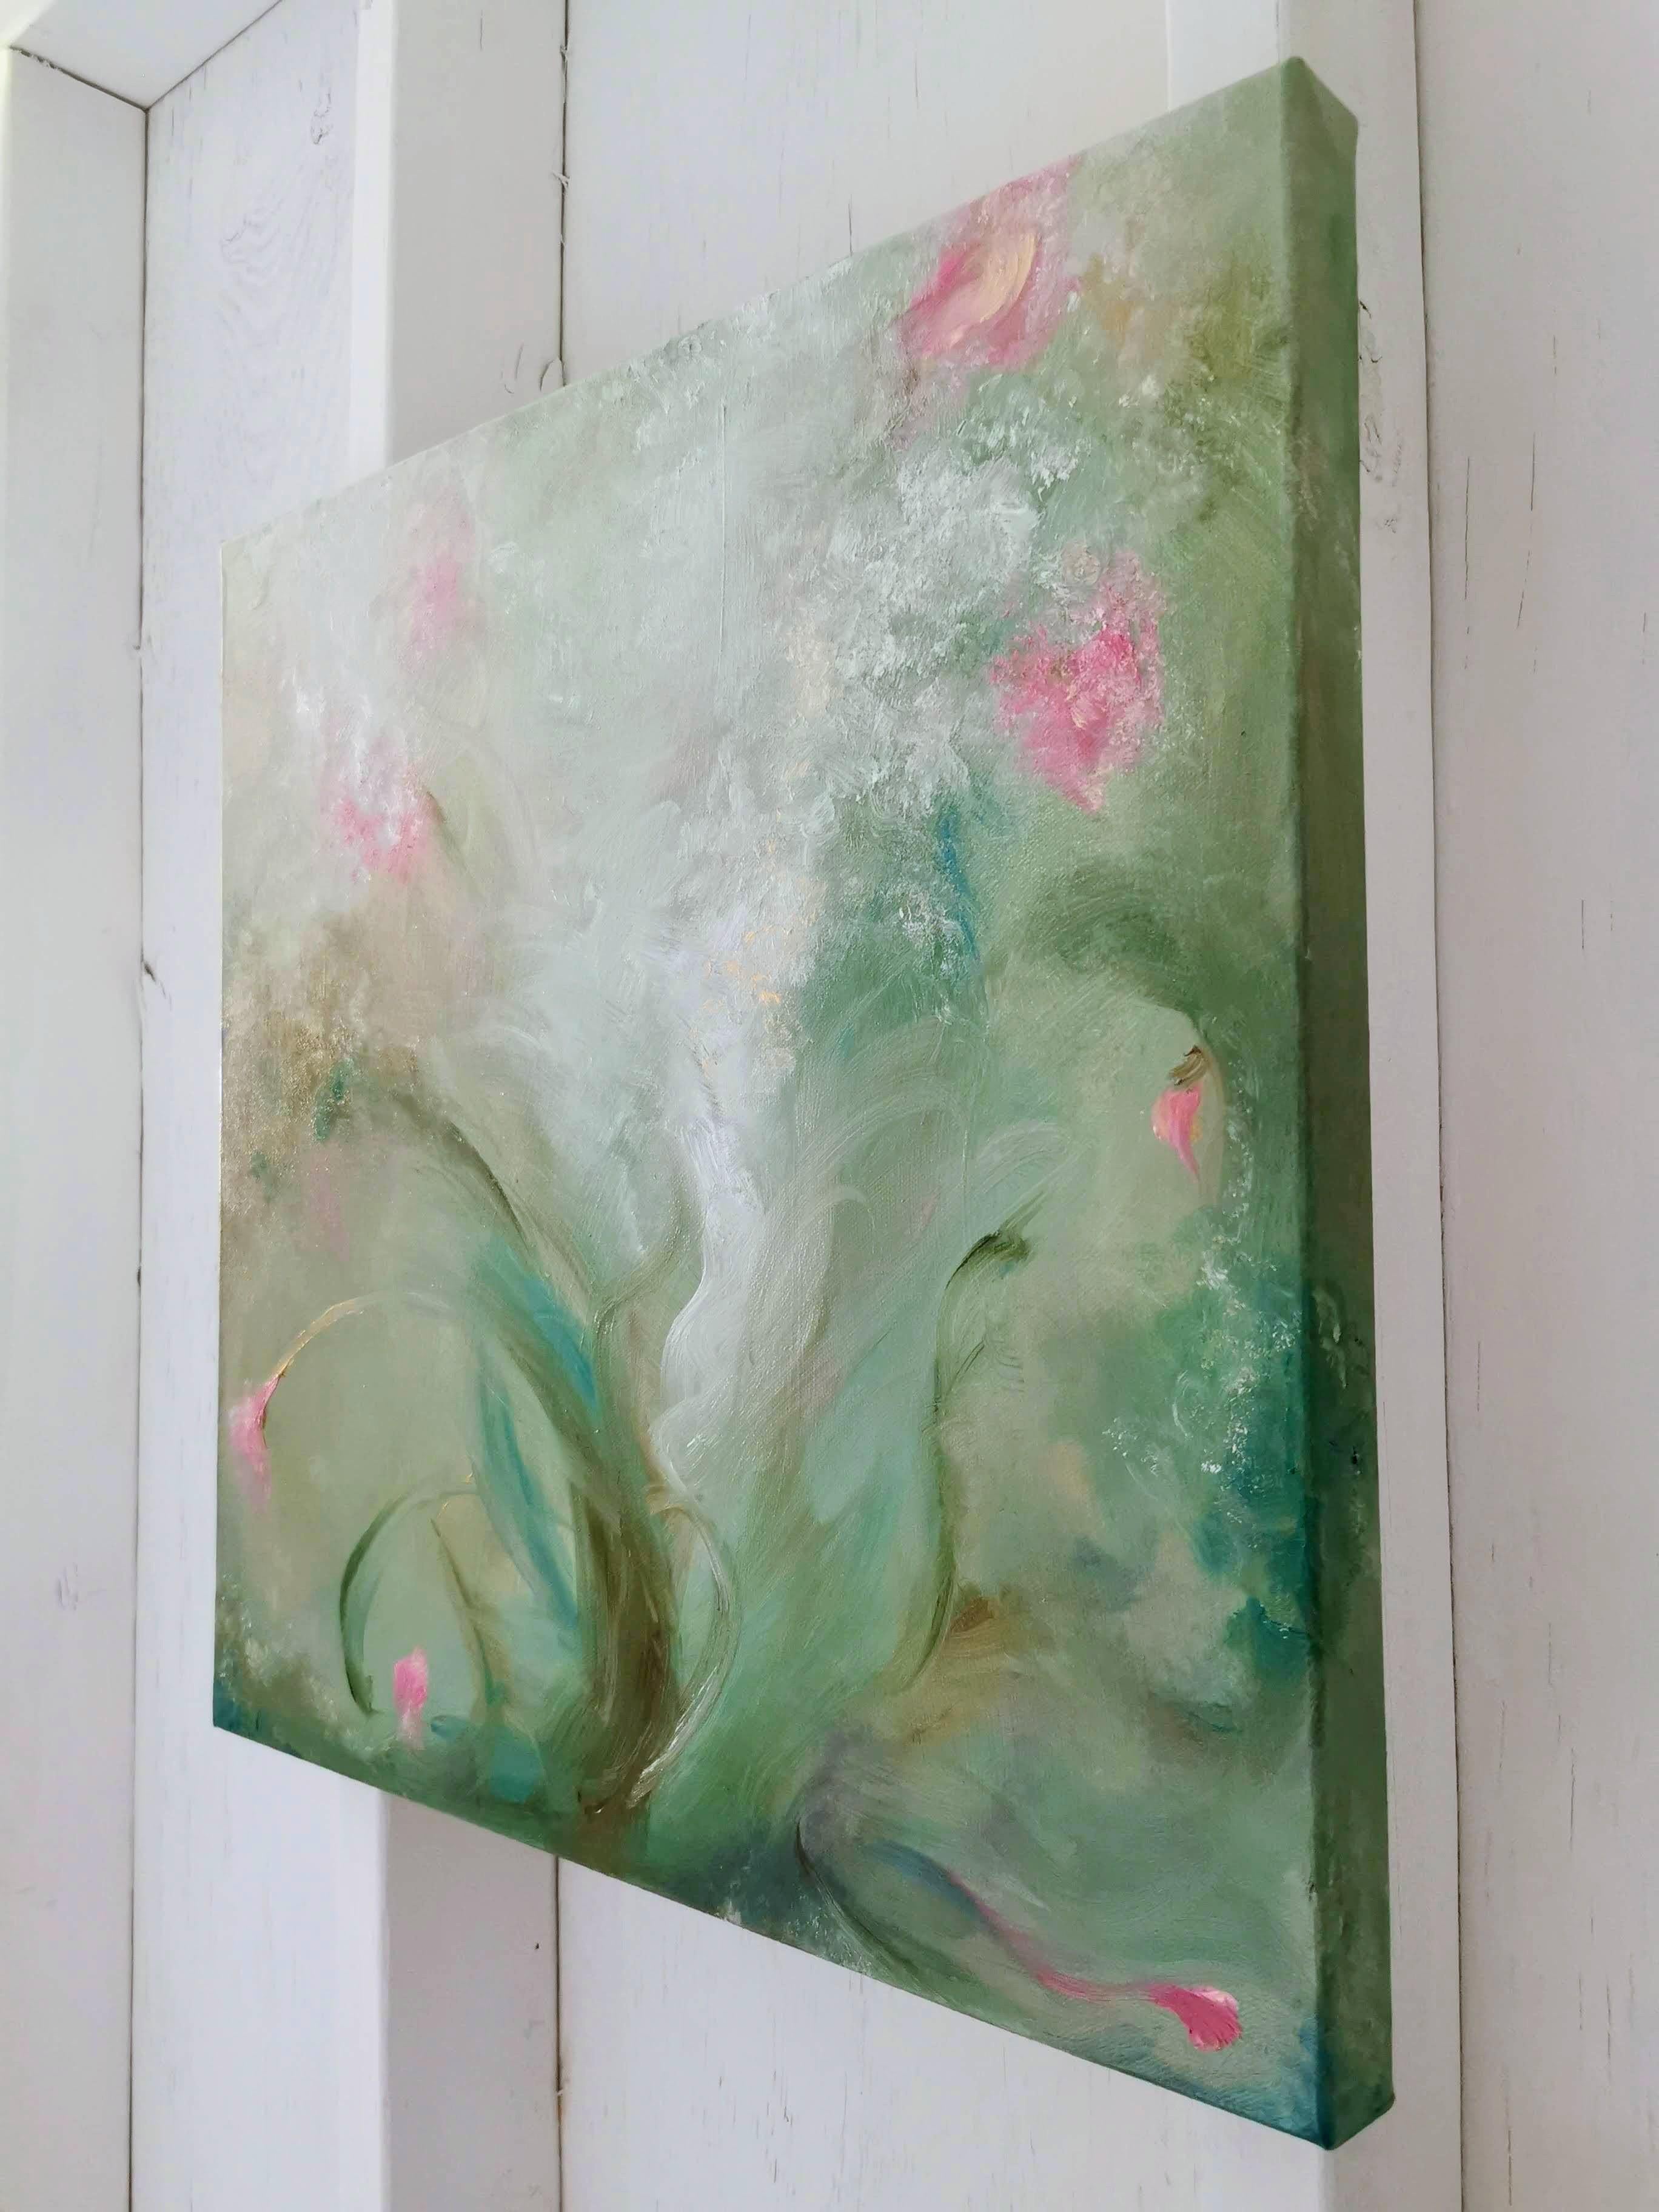 In this oil creation, I've swirled hues of green with delicate pinks to encapsulate the rebirth and vitality of the spring season. Each stroke is charged with emotion, expressing nature's dance as it awakens from slumber. This piece is a